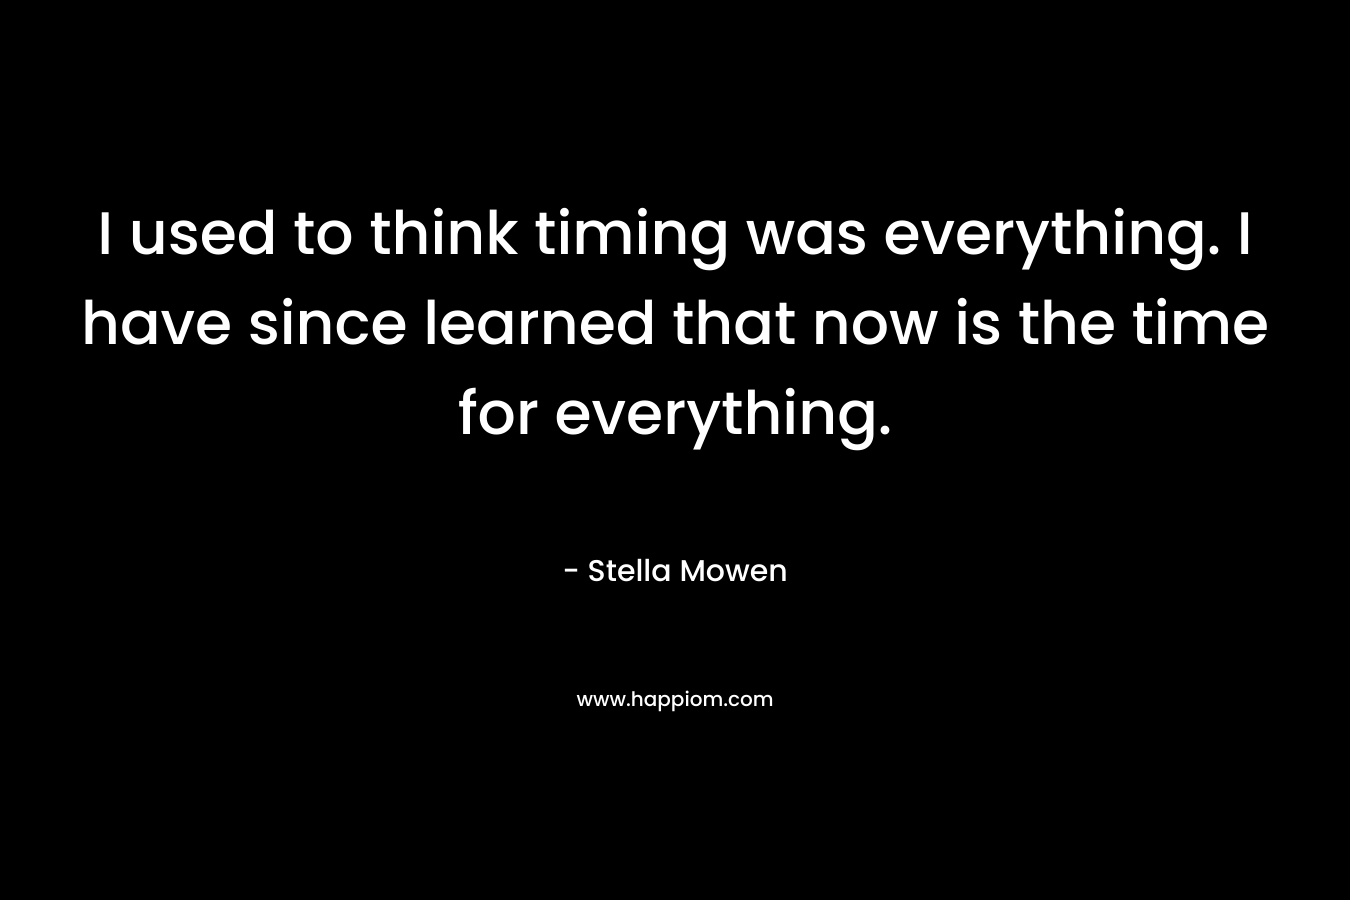 I used to think timing was everything. I have since learned that now is the time for everything.